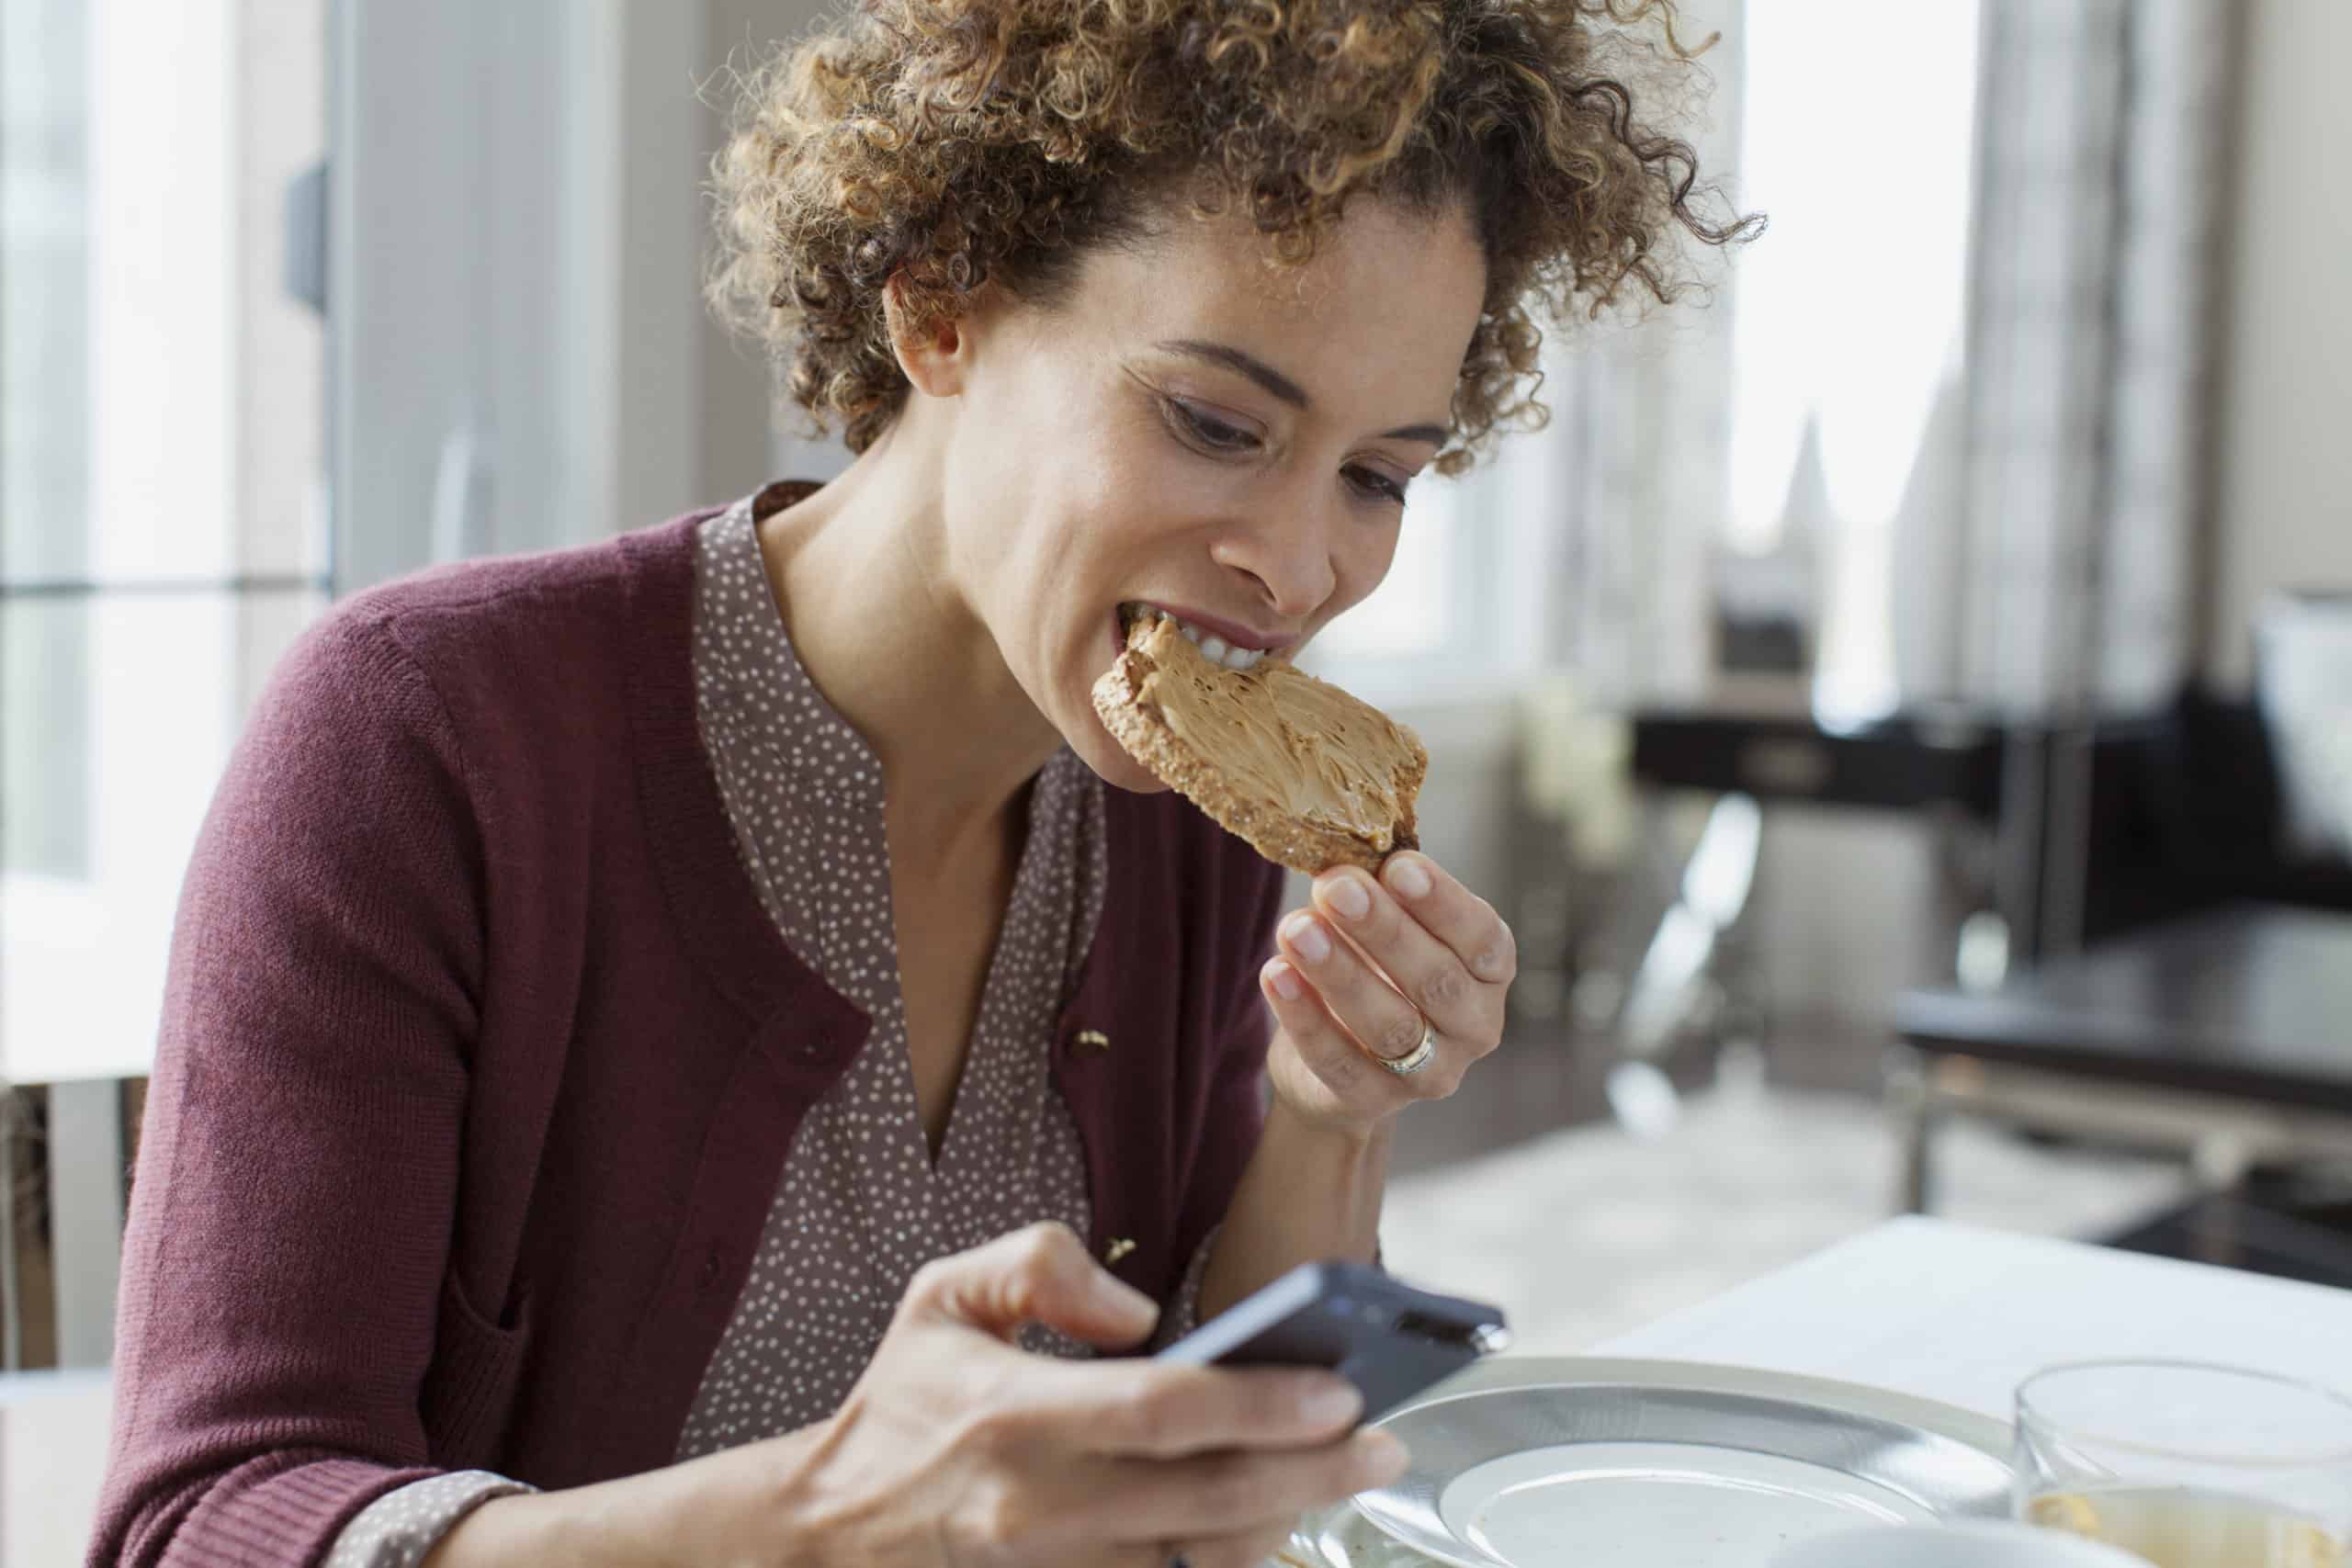 Woman eating toast while checking smartphone.